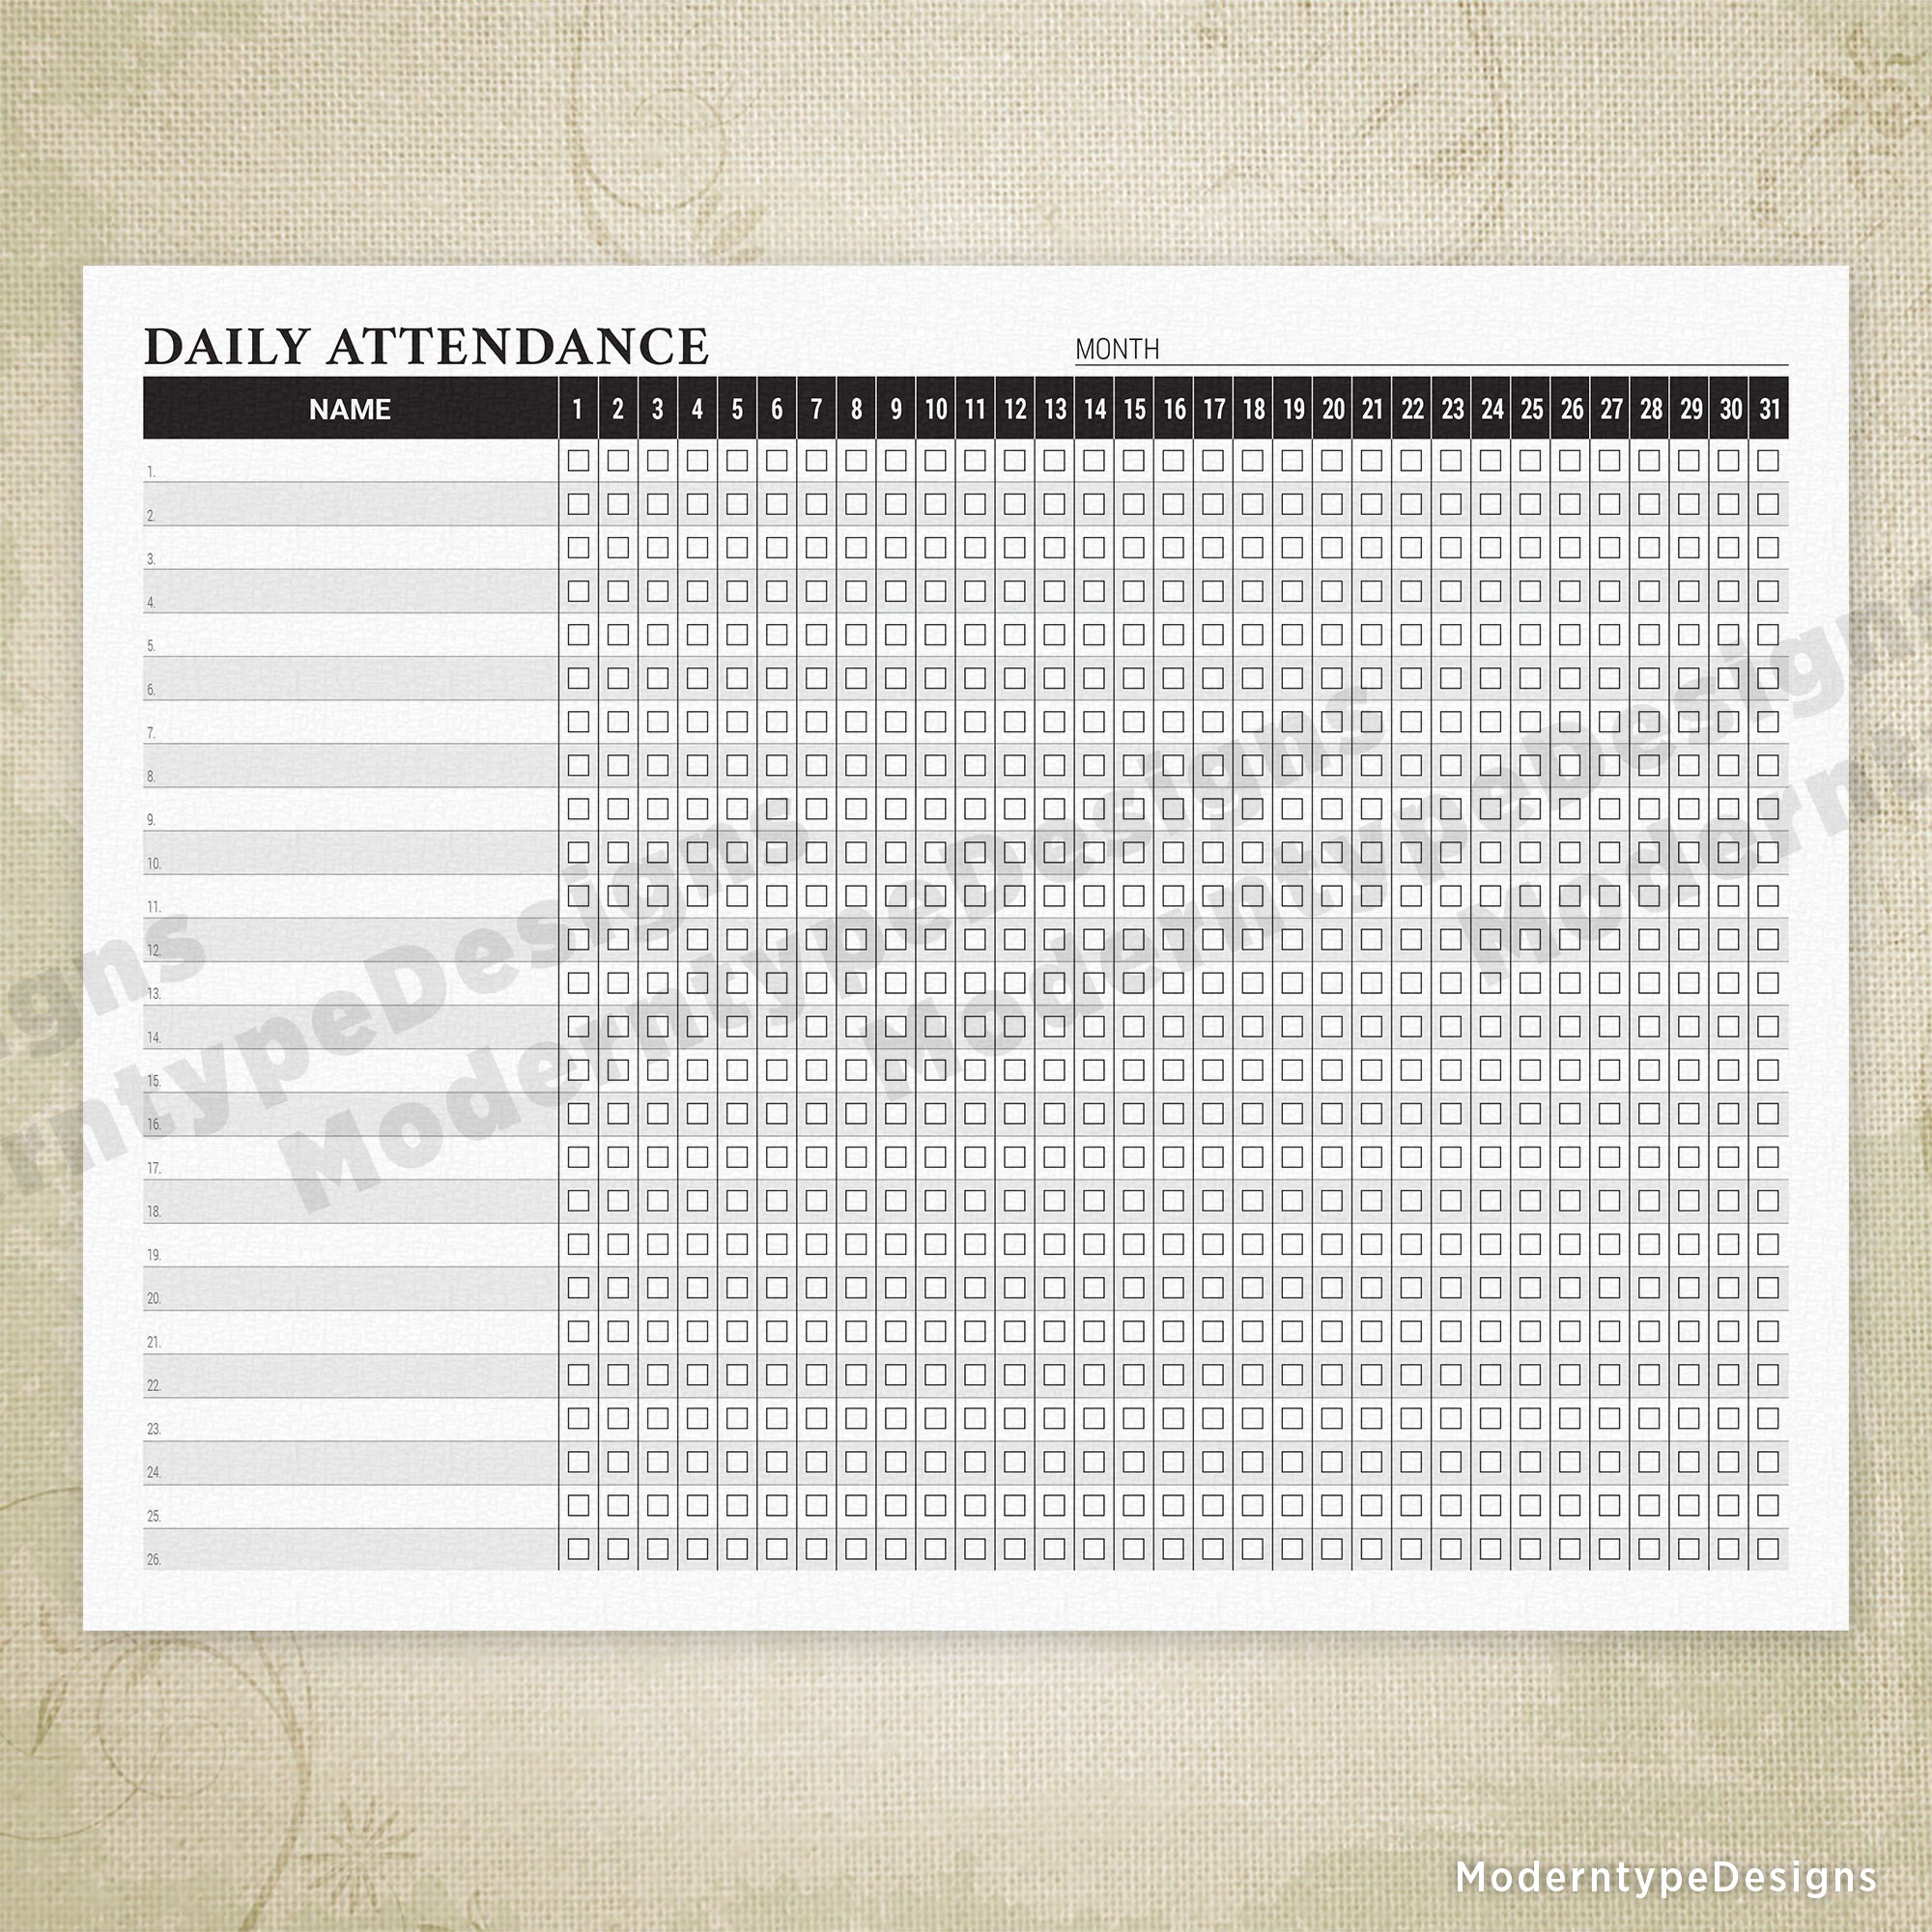 Daily Attendance Sheet Printable